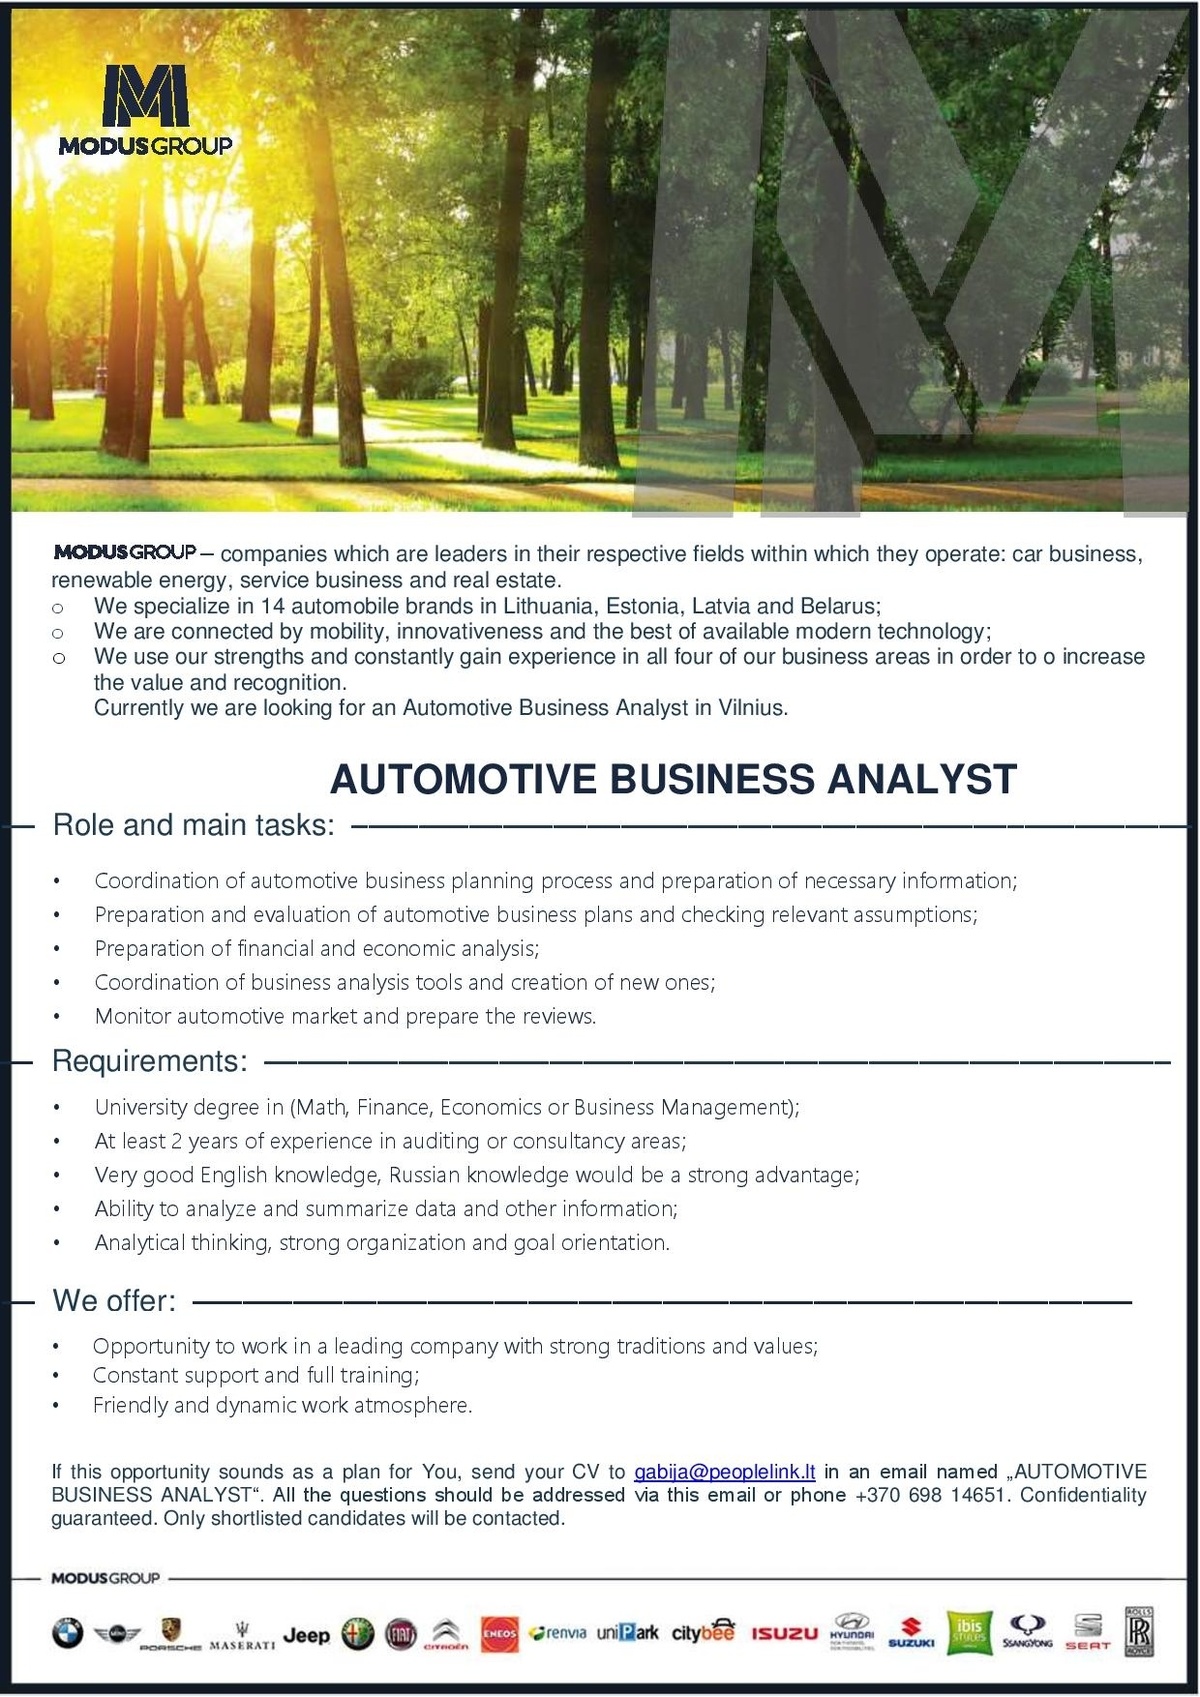 People Link, UAB AUTOMOTIVE BUSINESS ANALYST